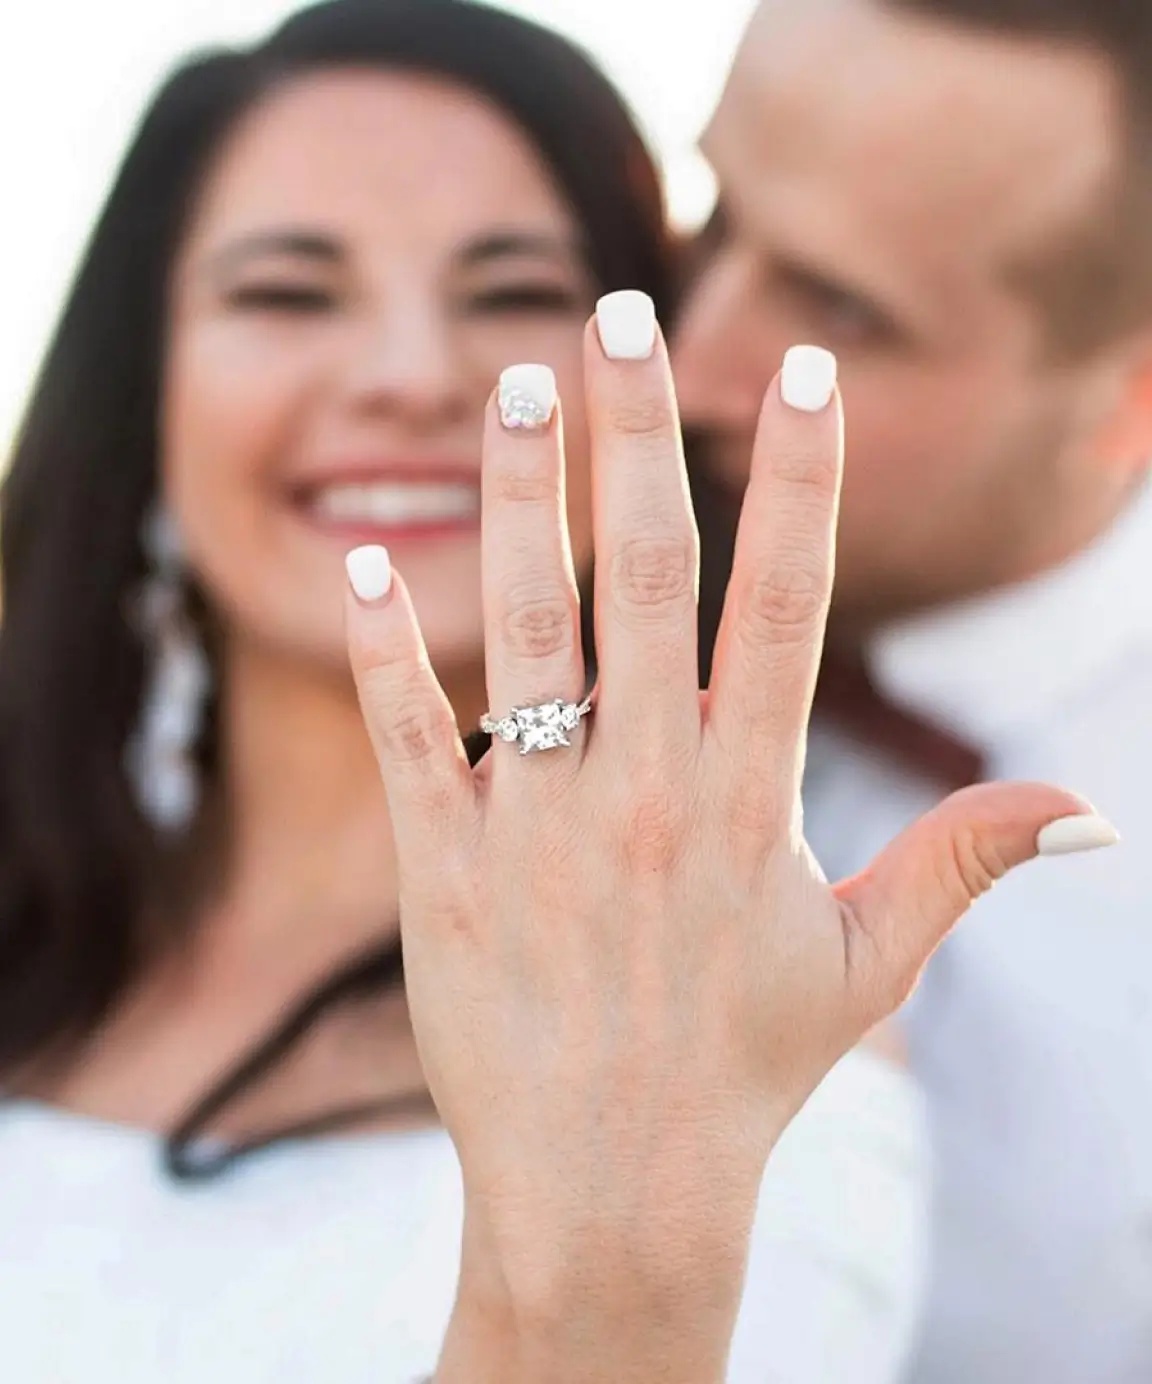 How to Find Your Partner's Engagement Ring Size Easily?